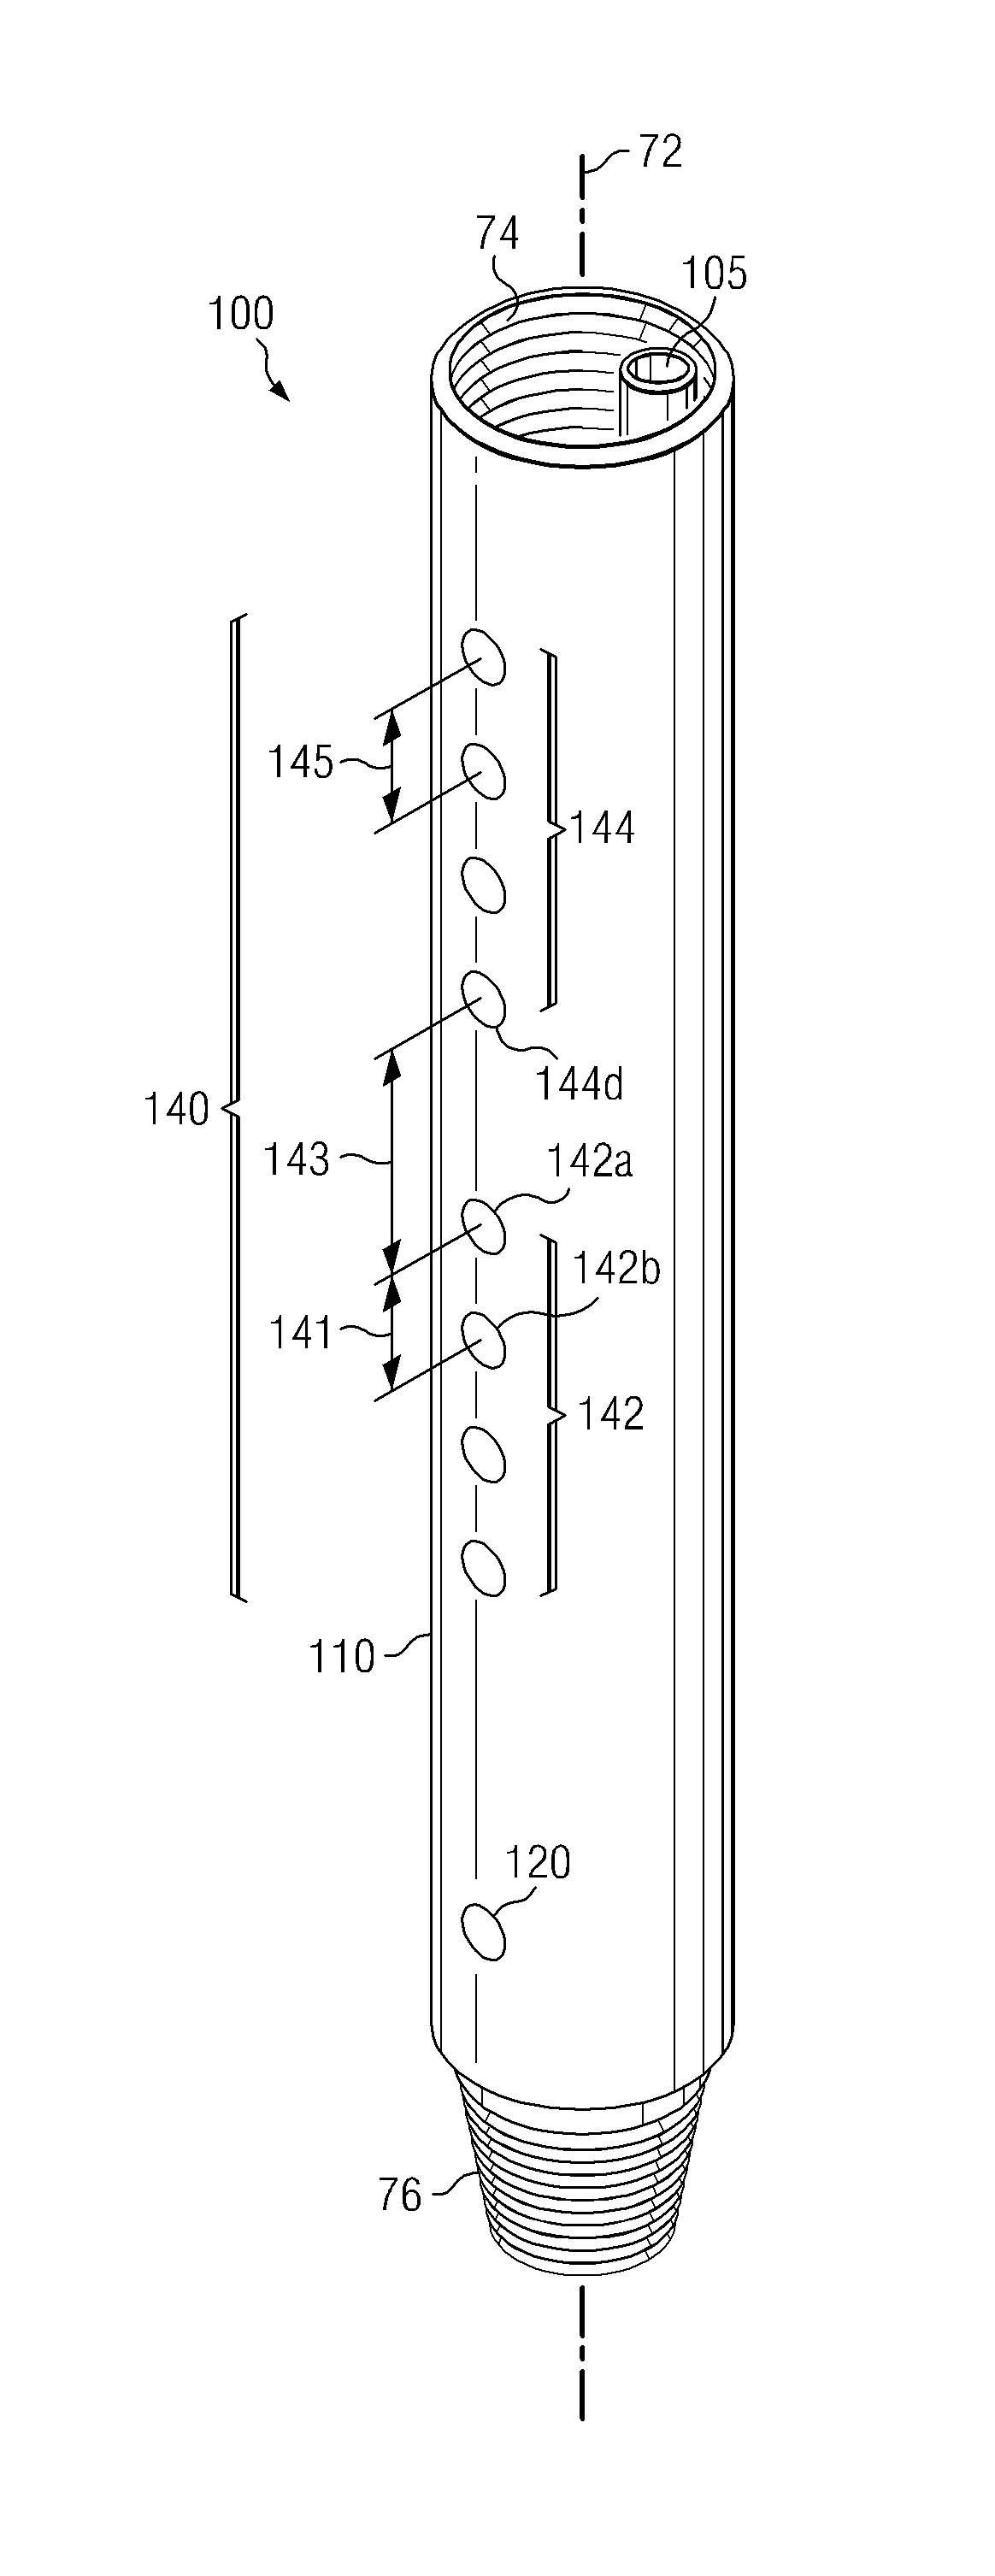 Downhole sonic logging tool including irregularly spaced receivers